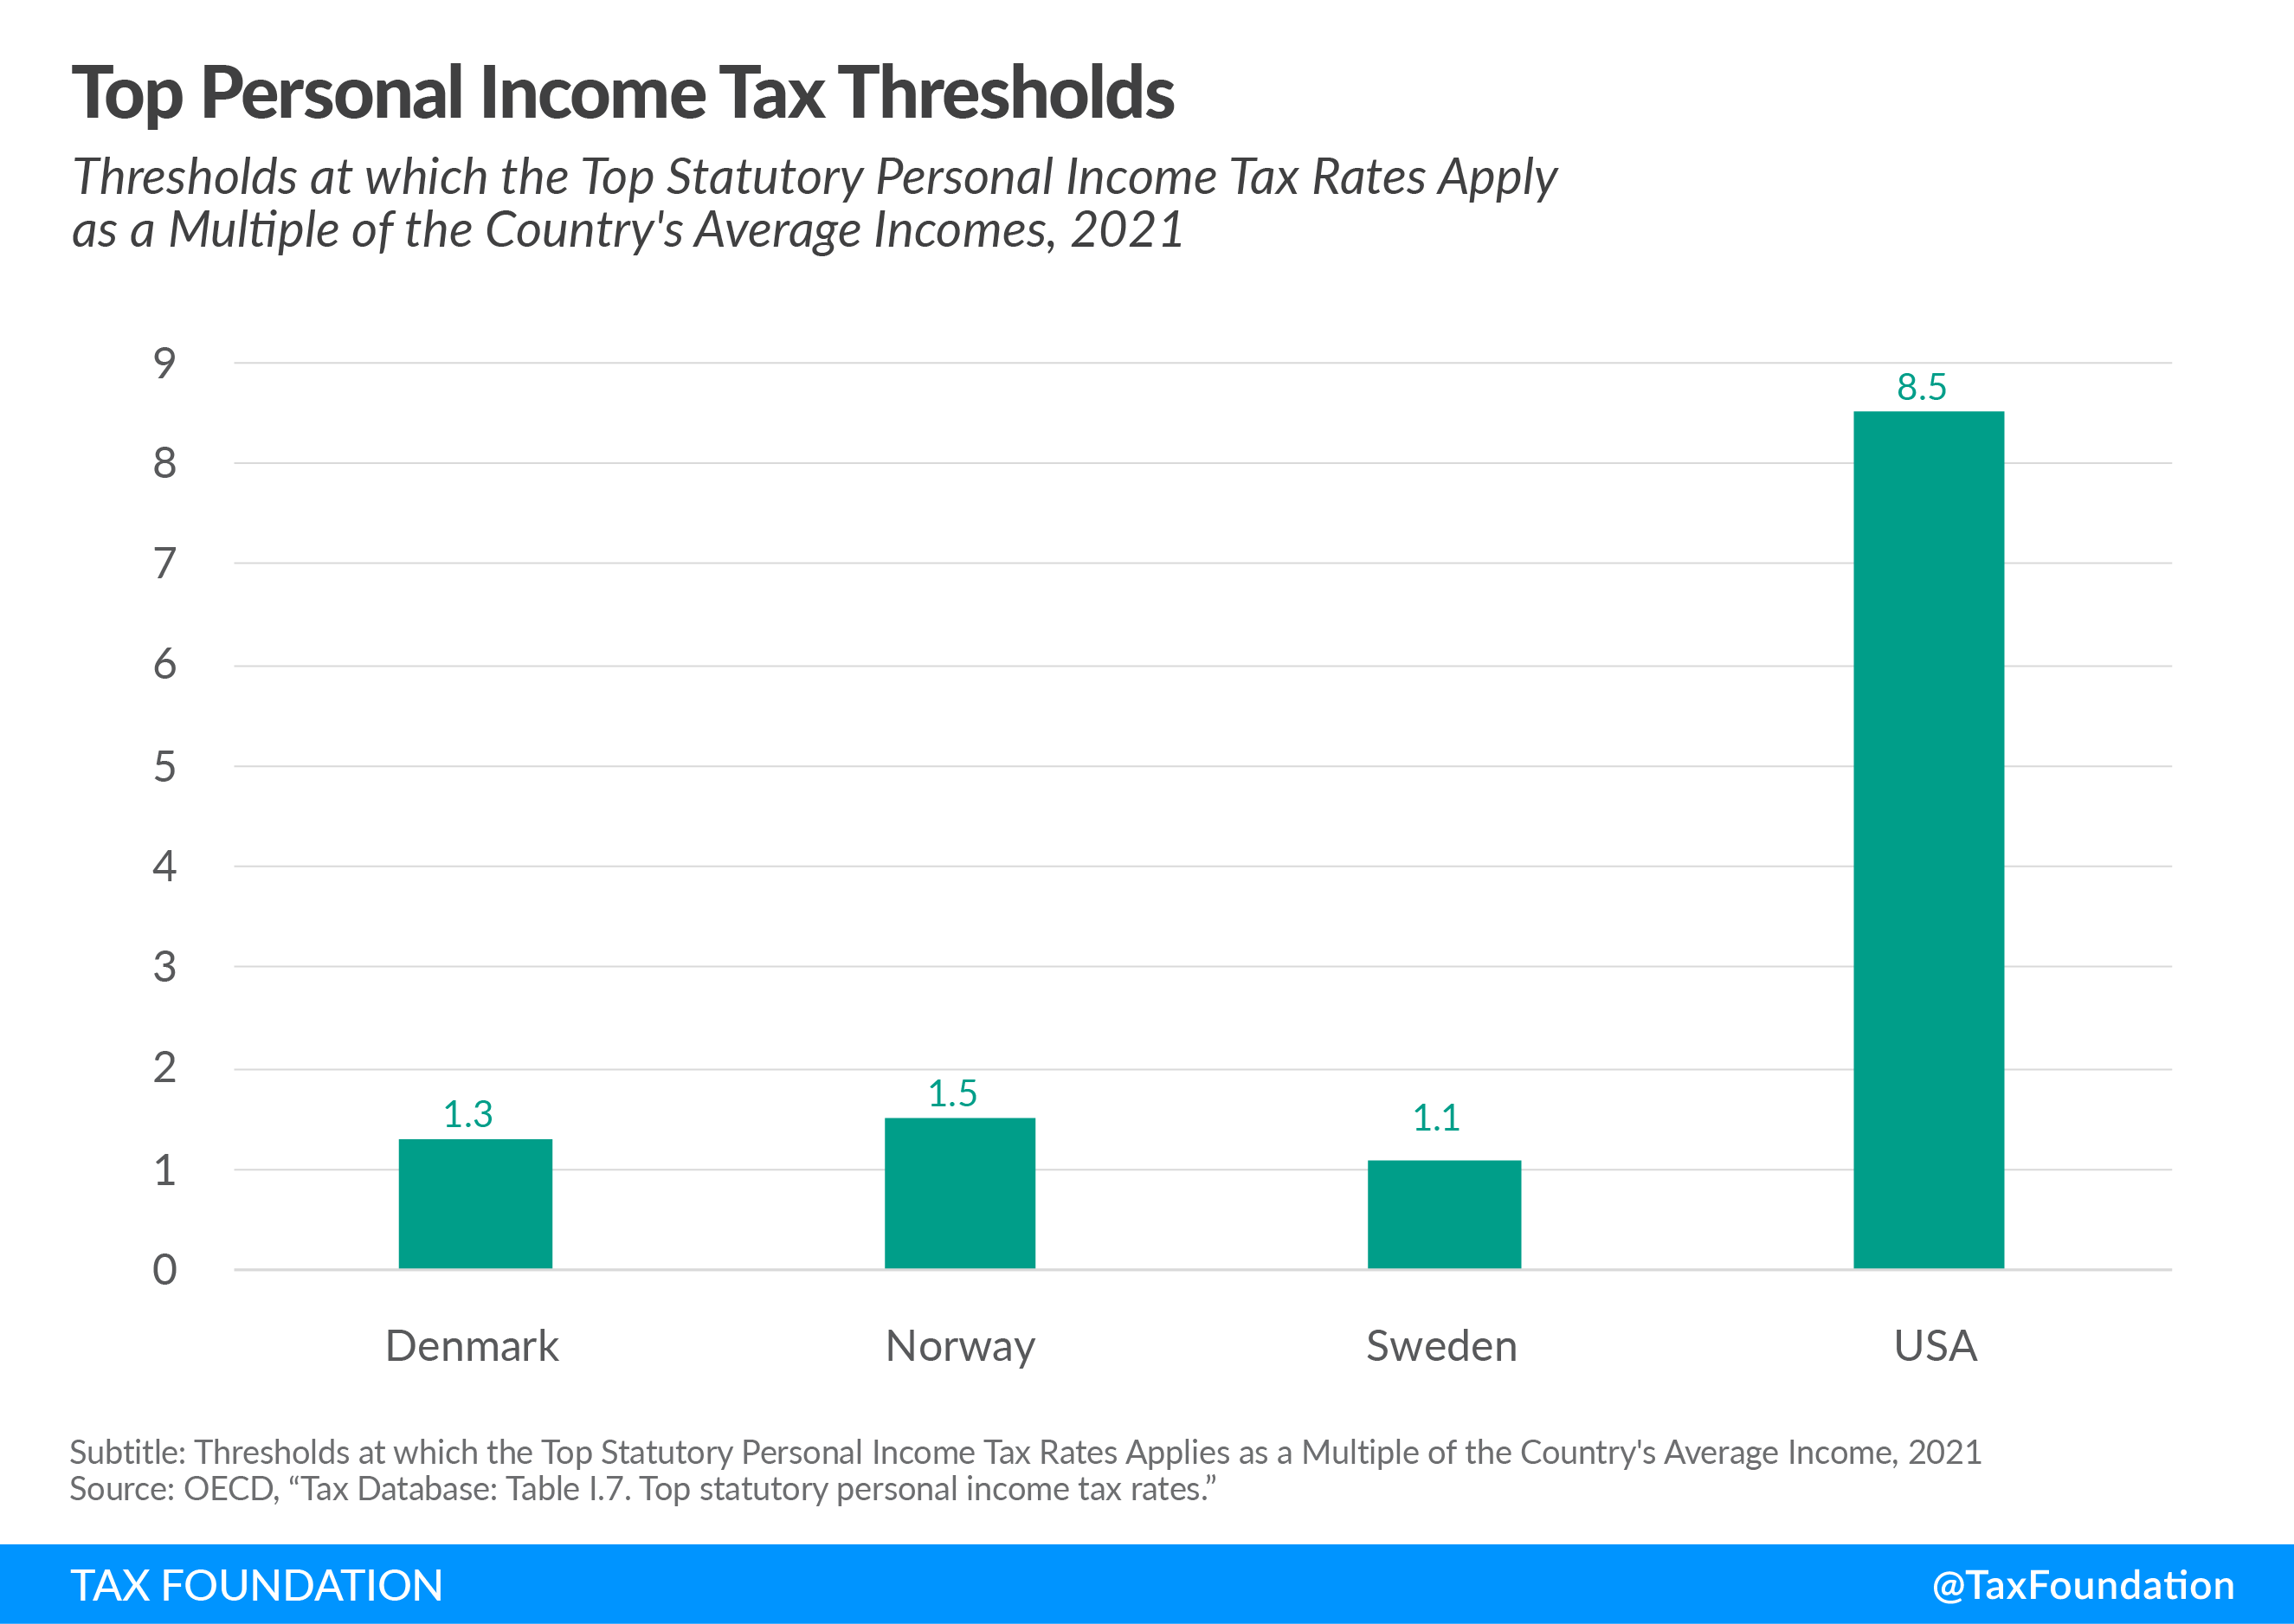 Scandinavian countries pay for social programs through flat income taxes compared to progressive US federal income tax